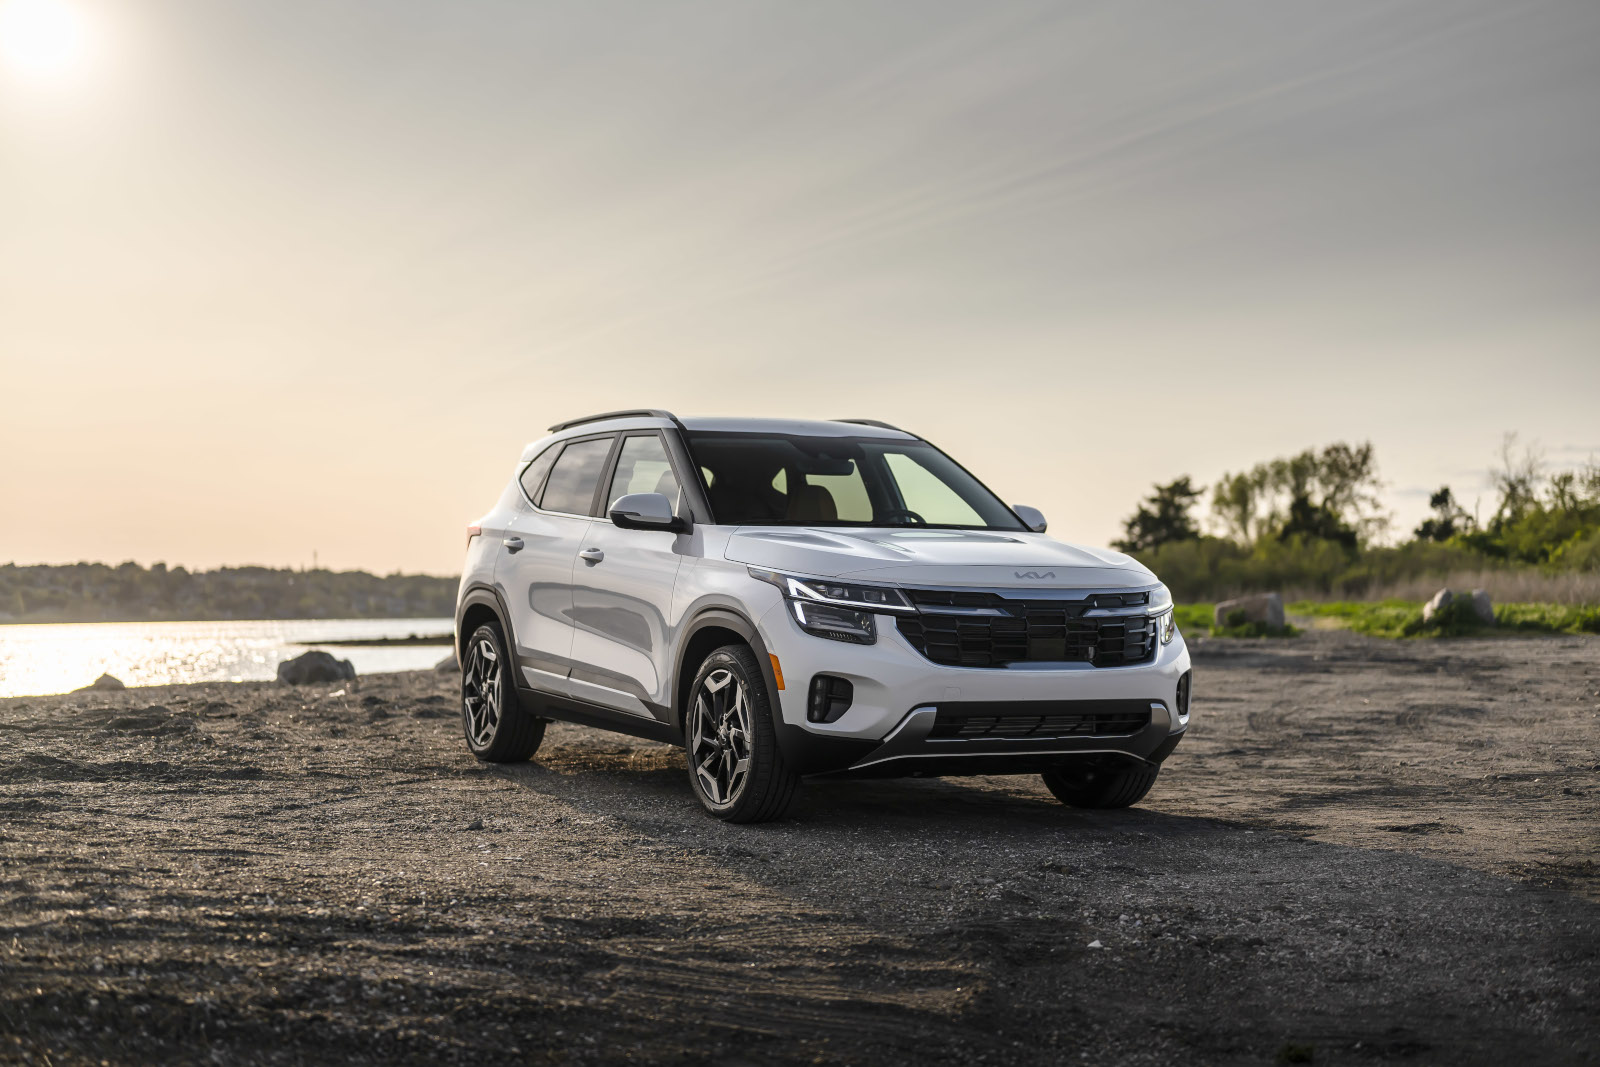 Top 5 Reasons the Kia Seltos Should be at the Top of Your List